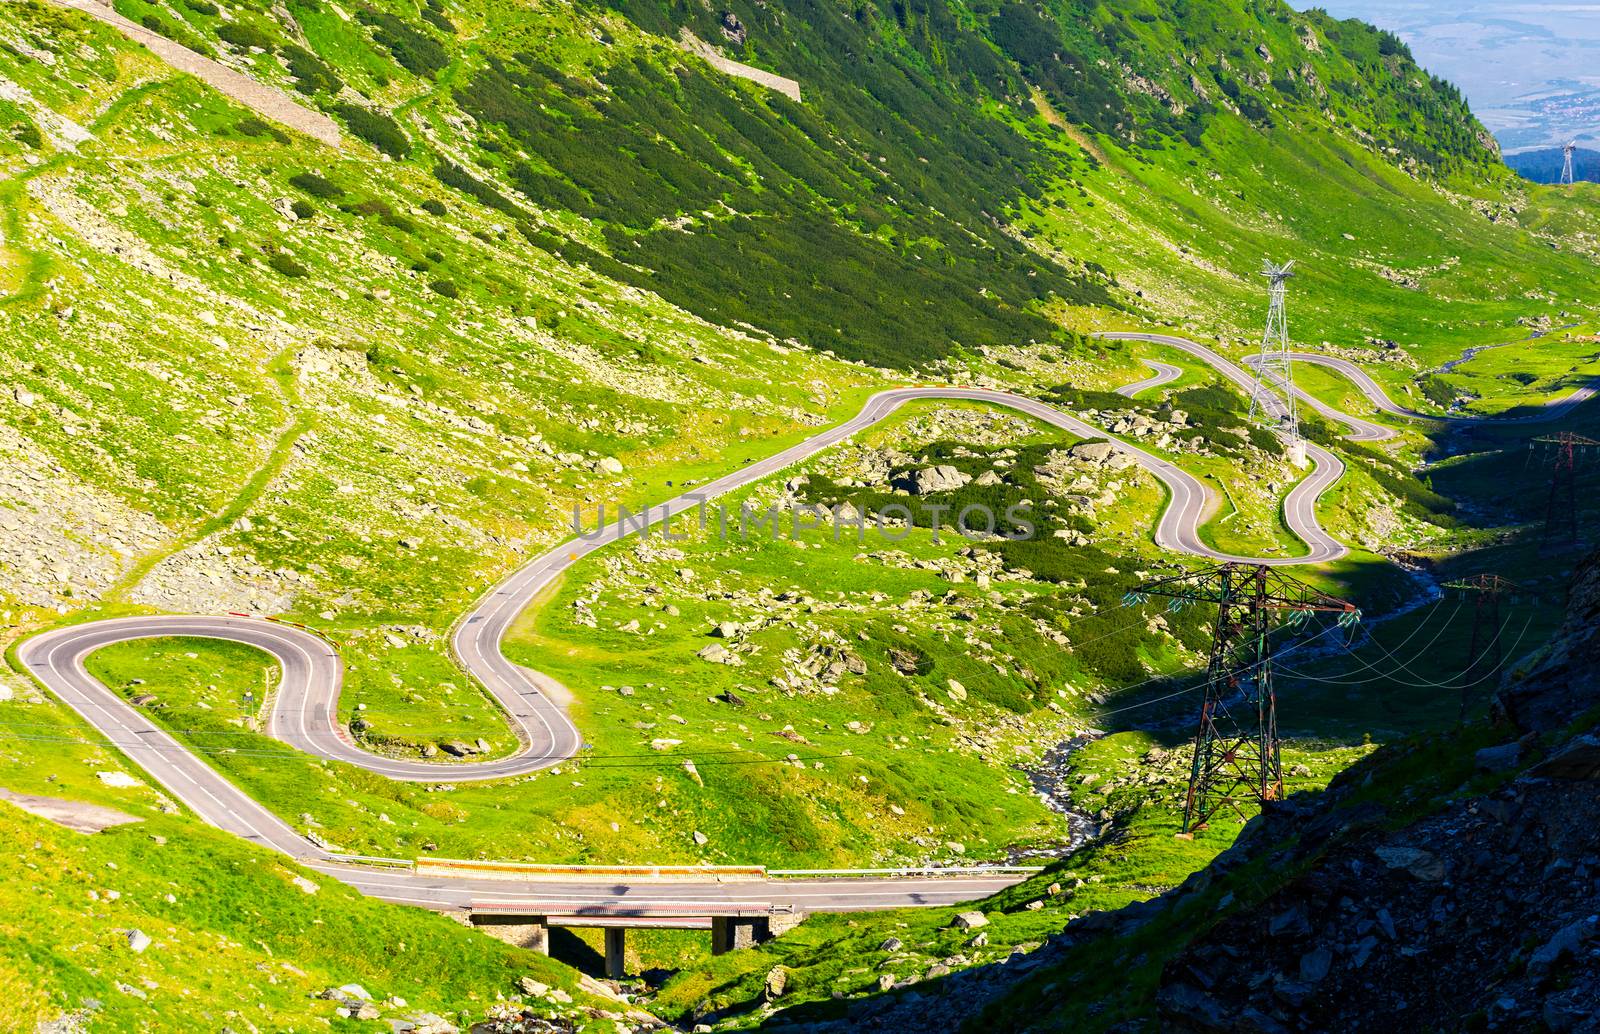 Legendary Transfagarasan road in Romanian mountains. winding serpentine among the grassy hills on a sunny morning